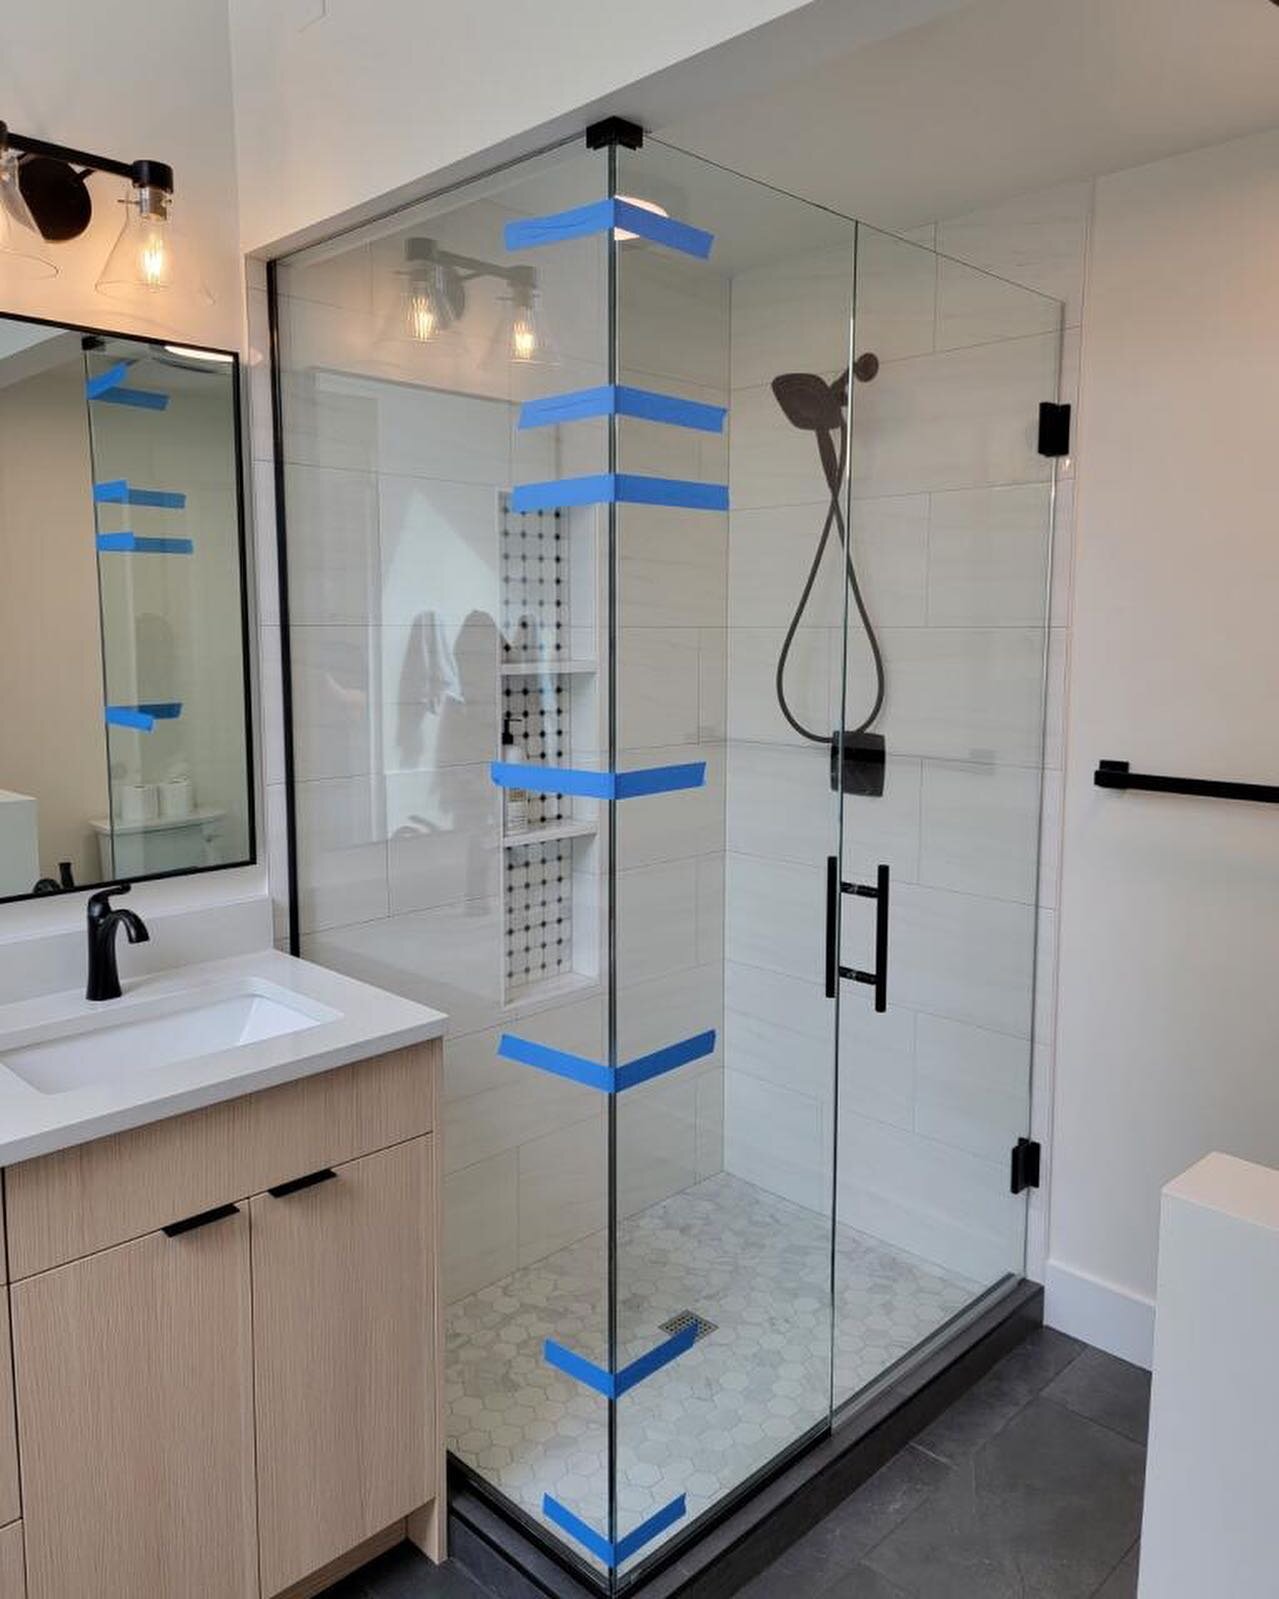 Corner Shower with Matte Black Hardware. Installed by our technicians, Eddie and Marcus. 

#seattleshowers #seattleshower#seattleshowerdoors #framelessglassenclosure #framelessglassenclosures #showerenclosure #glassshowerenclosure #frameless #framele